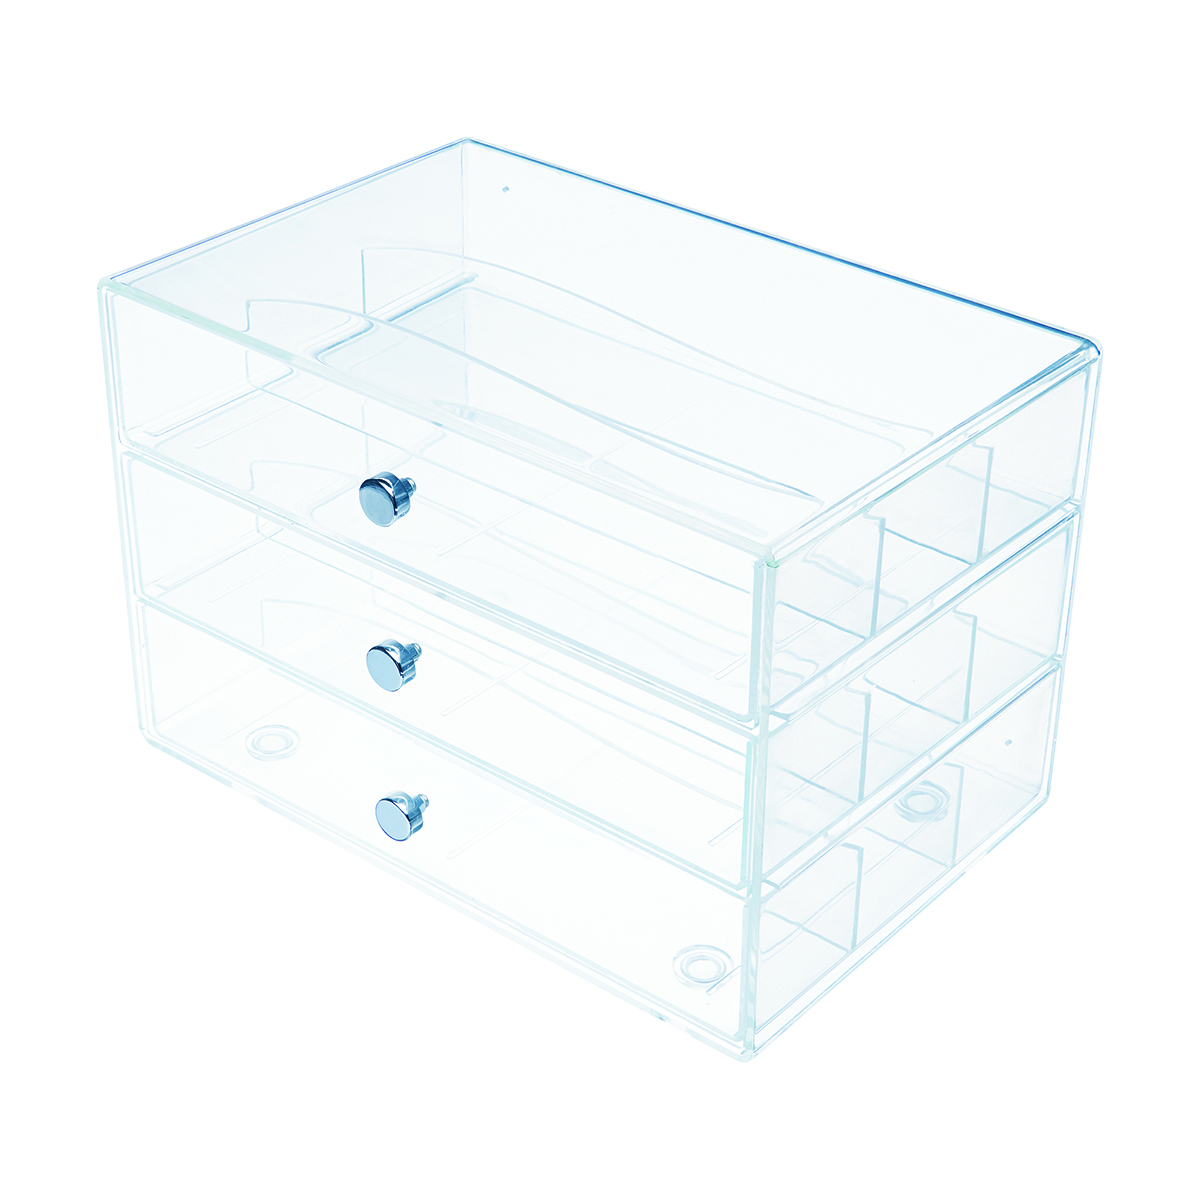 https://www.containerstore.com/catalogimages/392403/10080737-Deflecto-3-Drawer-Organizer.jpg